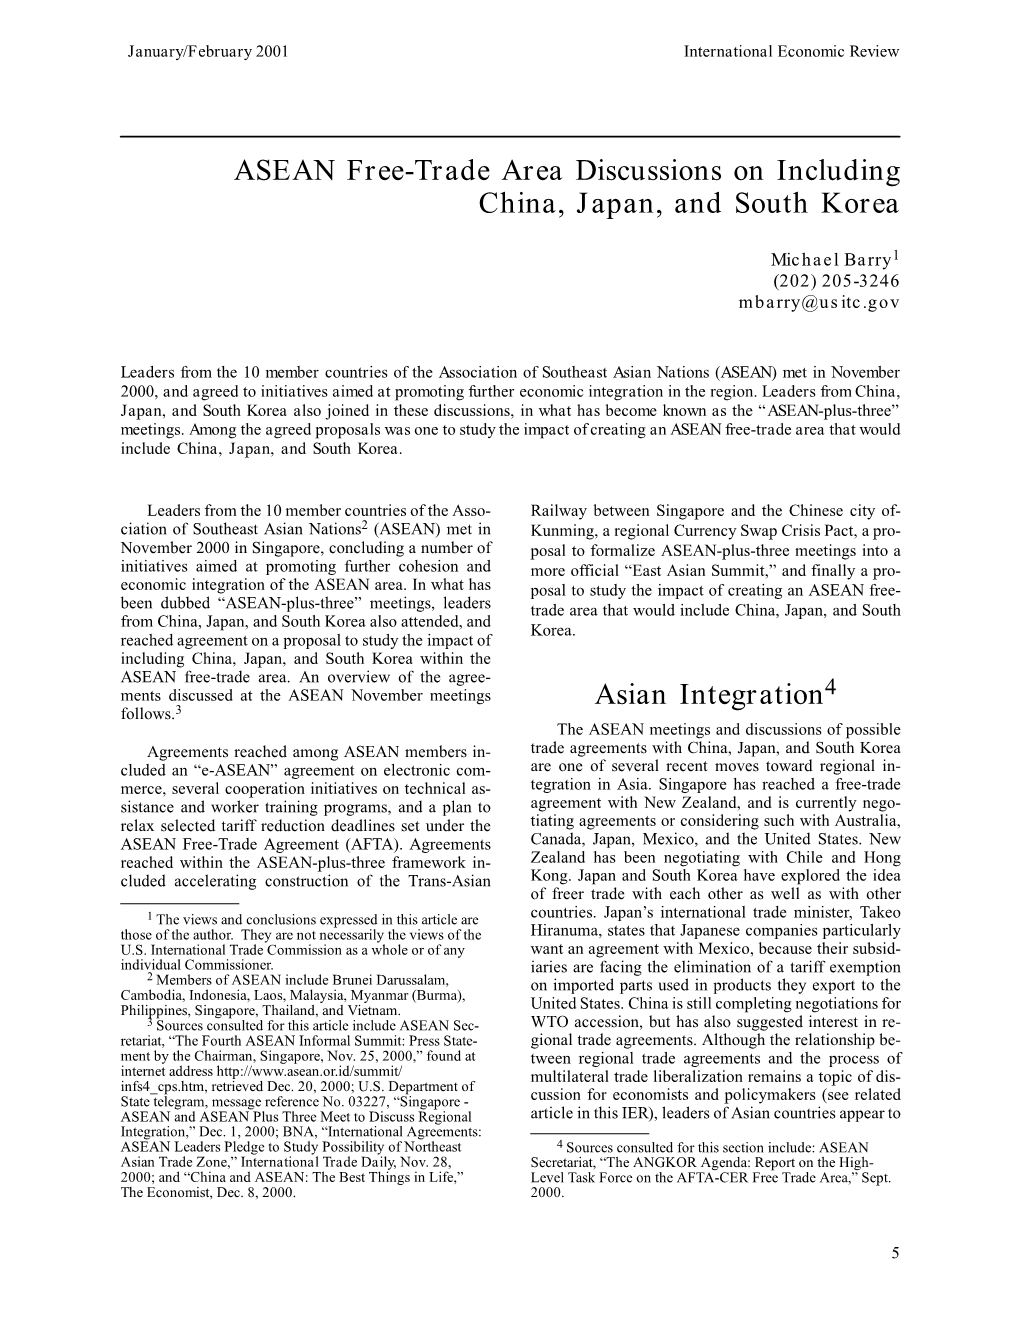 ASEAN Free-Trade Area Discussions on Including China, Japan, and South Korea